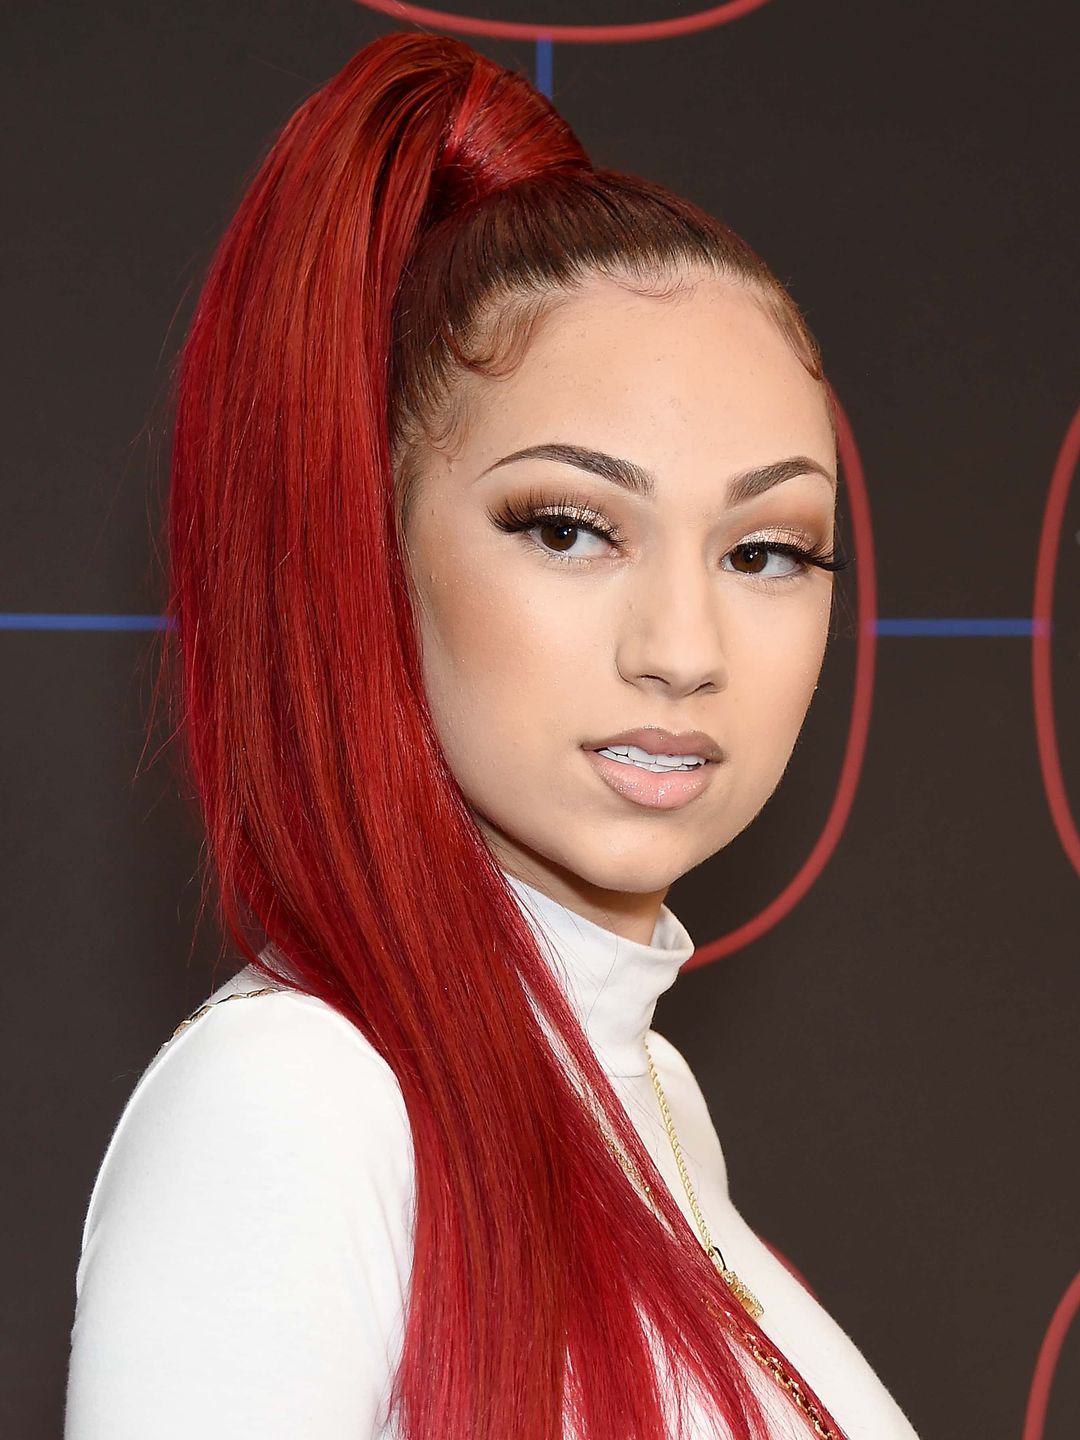 Bhad Bhabie young pics